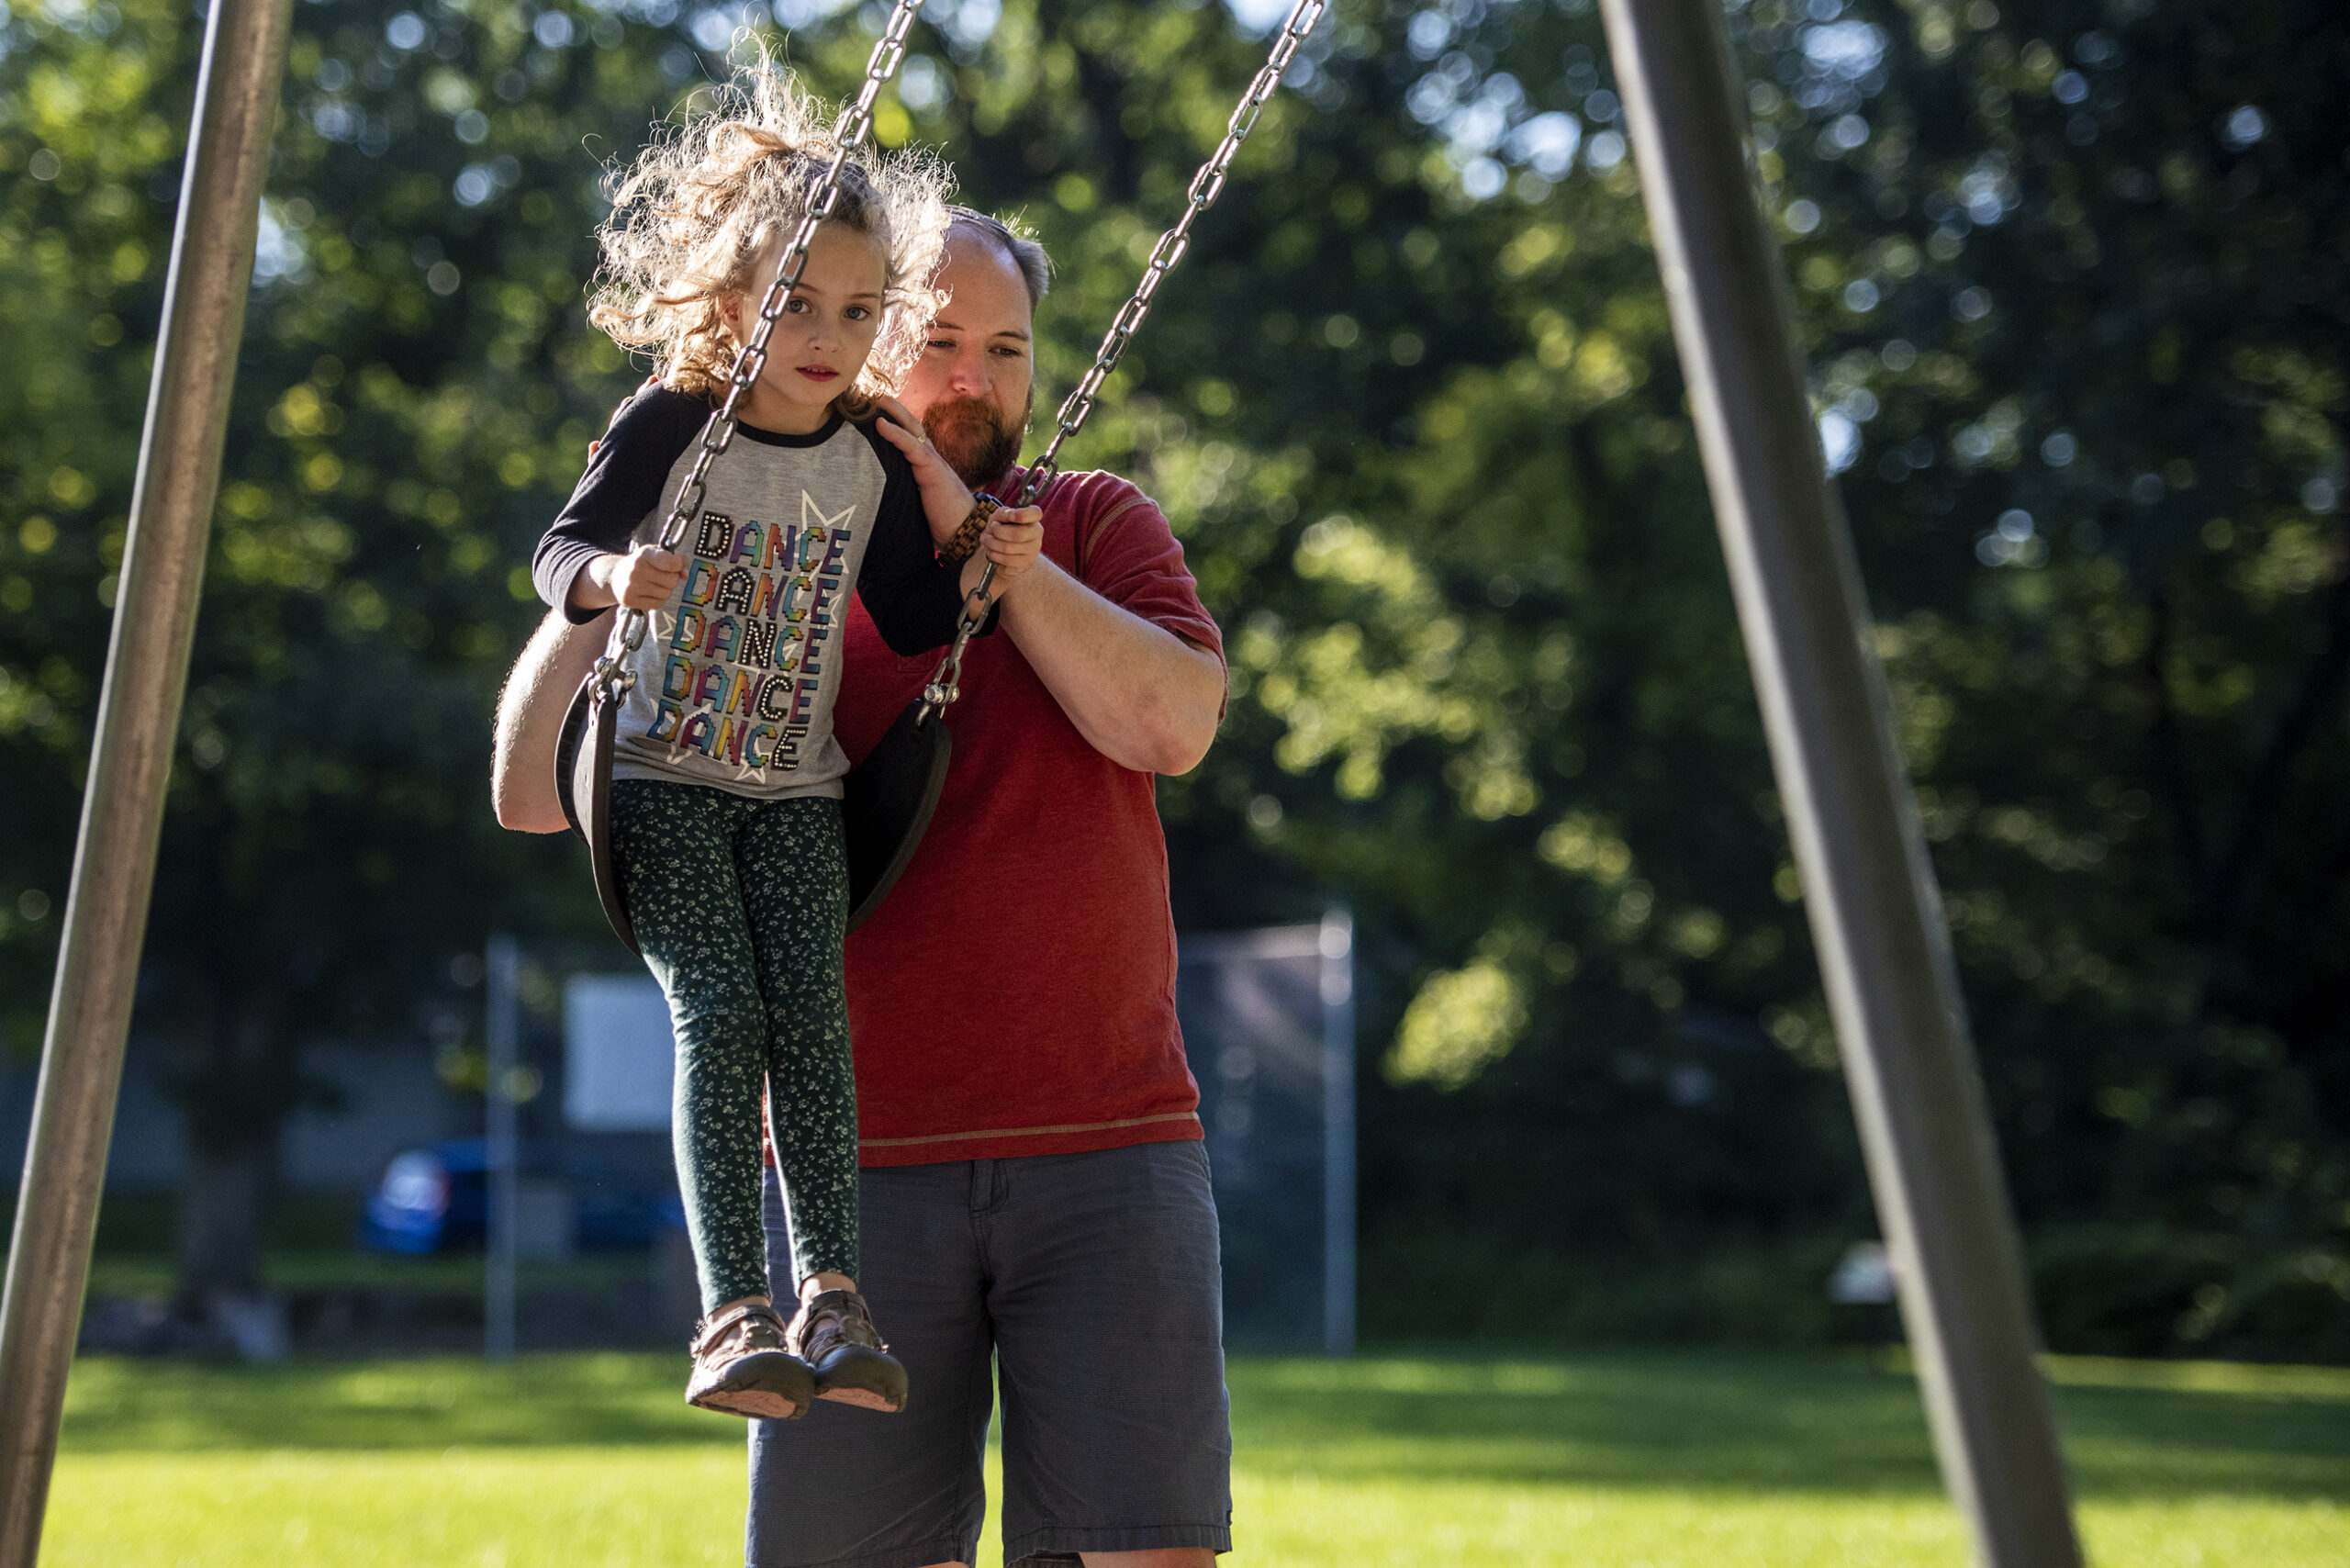 A father swings his daughter on a swing set outside.